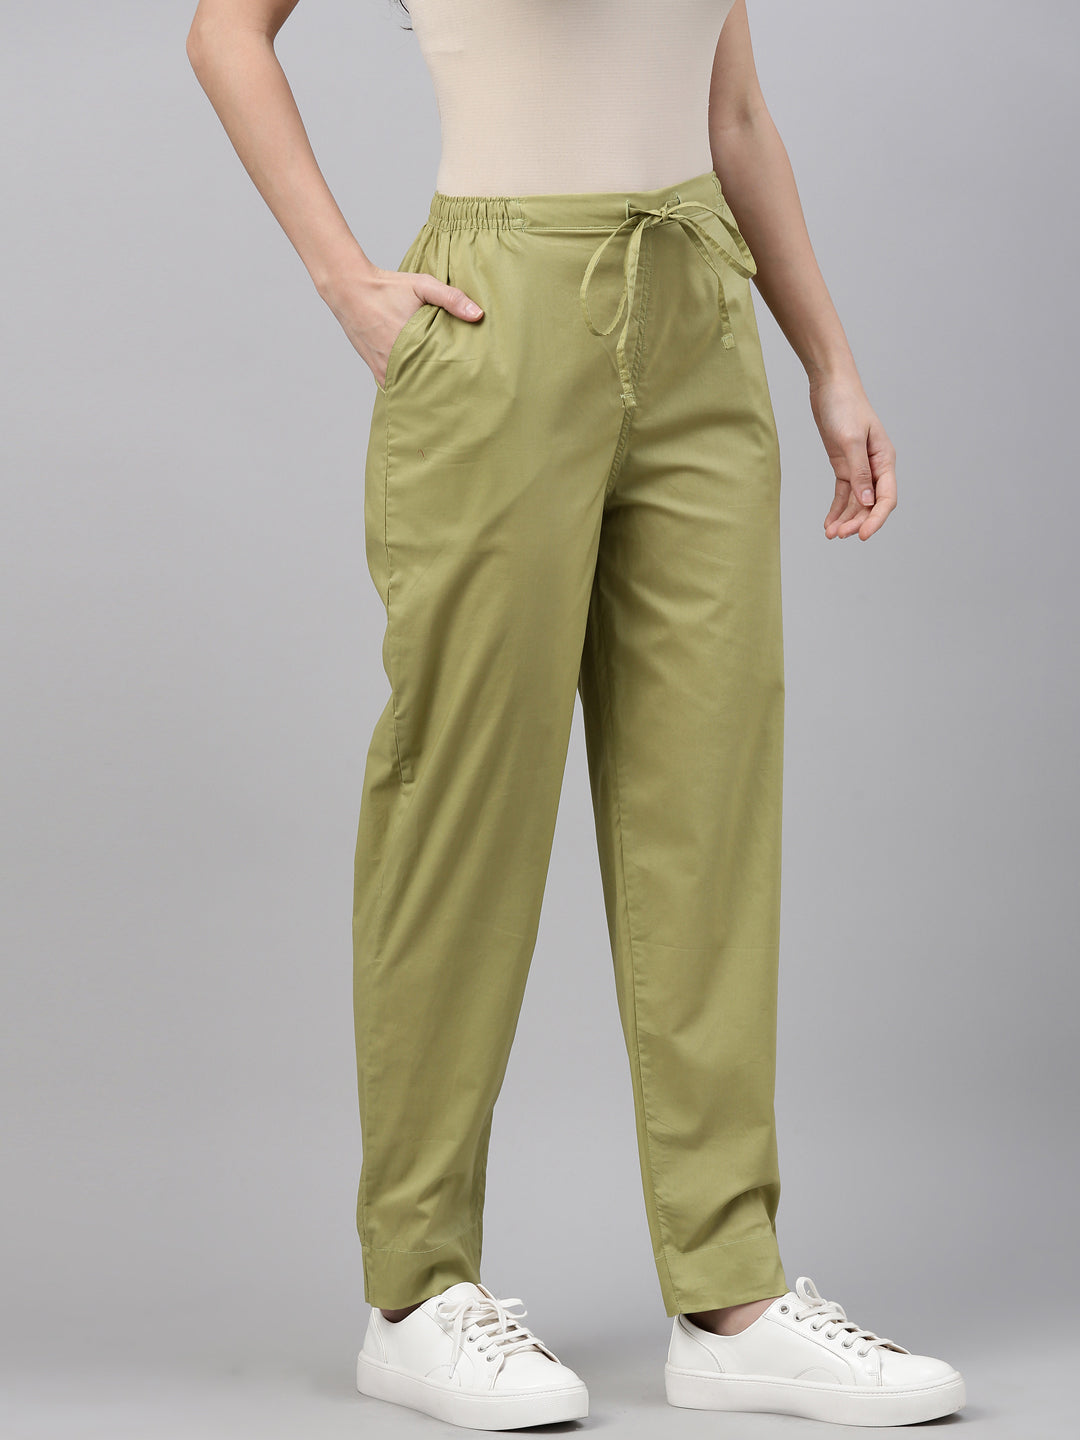 PISTACHIO GREEN BRUSHED LOOSE FIT PANTS WOMEN